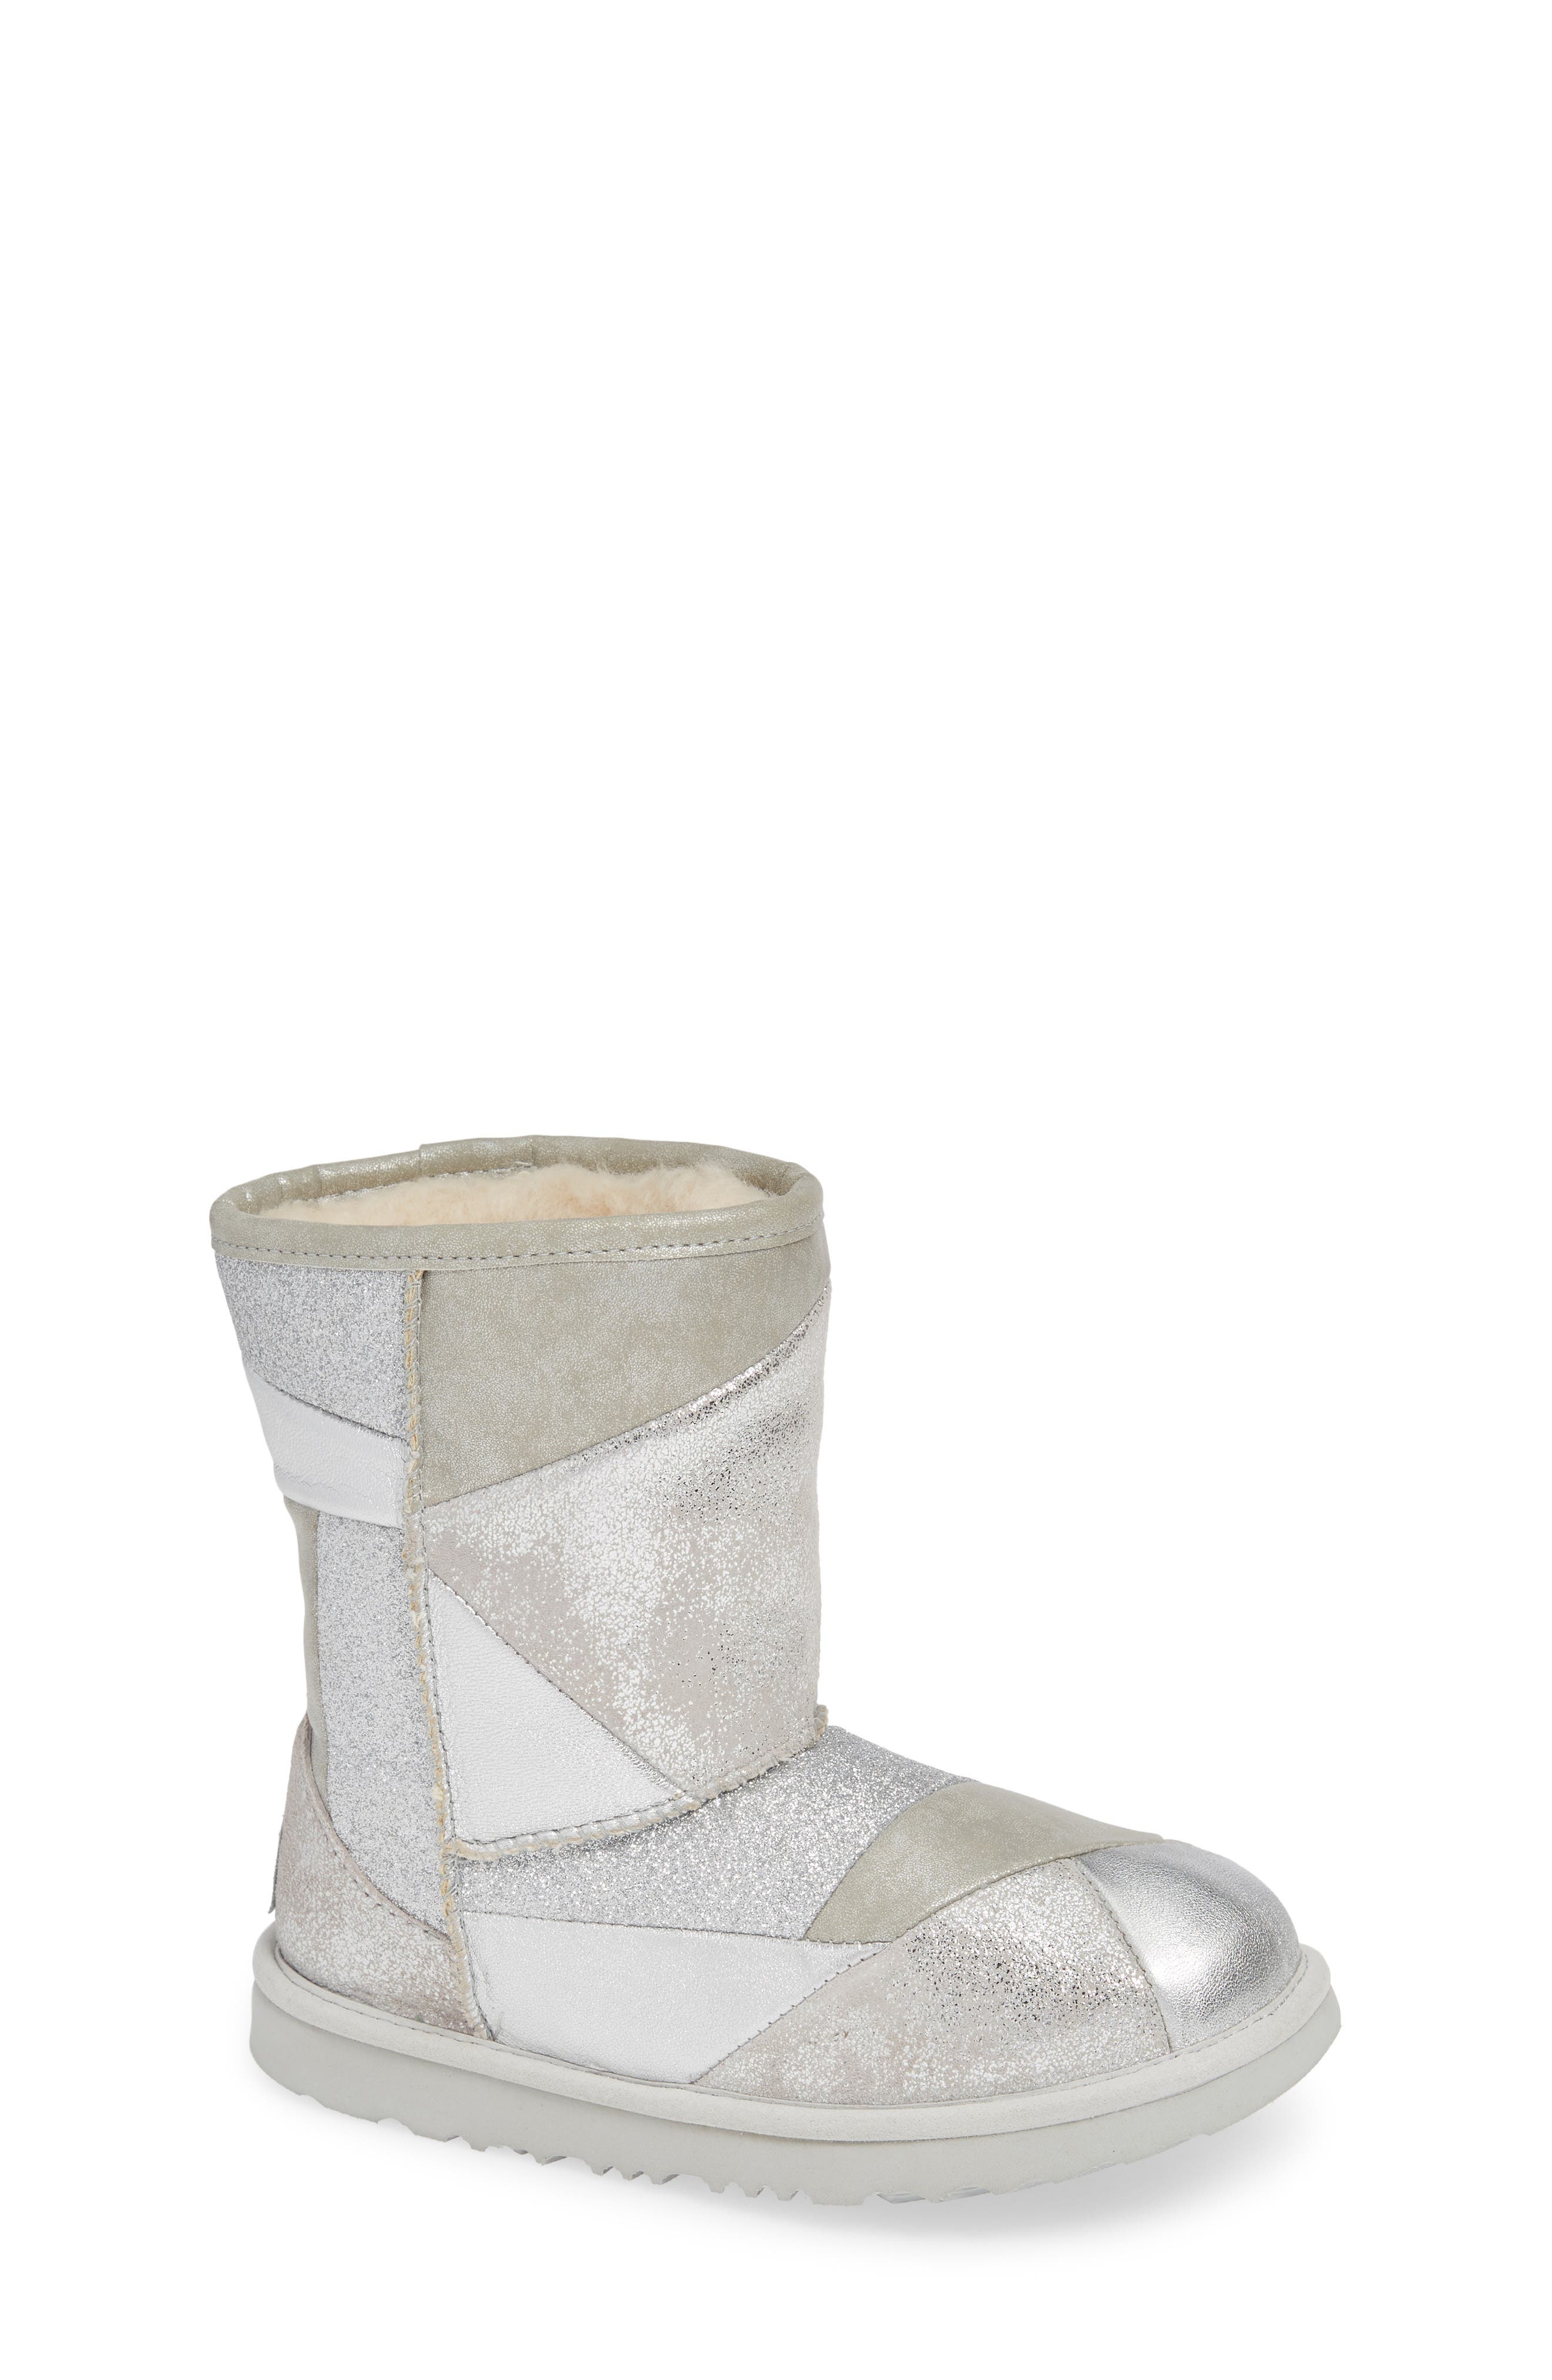 ugg patchwork boots